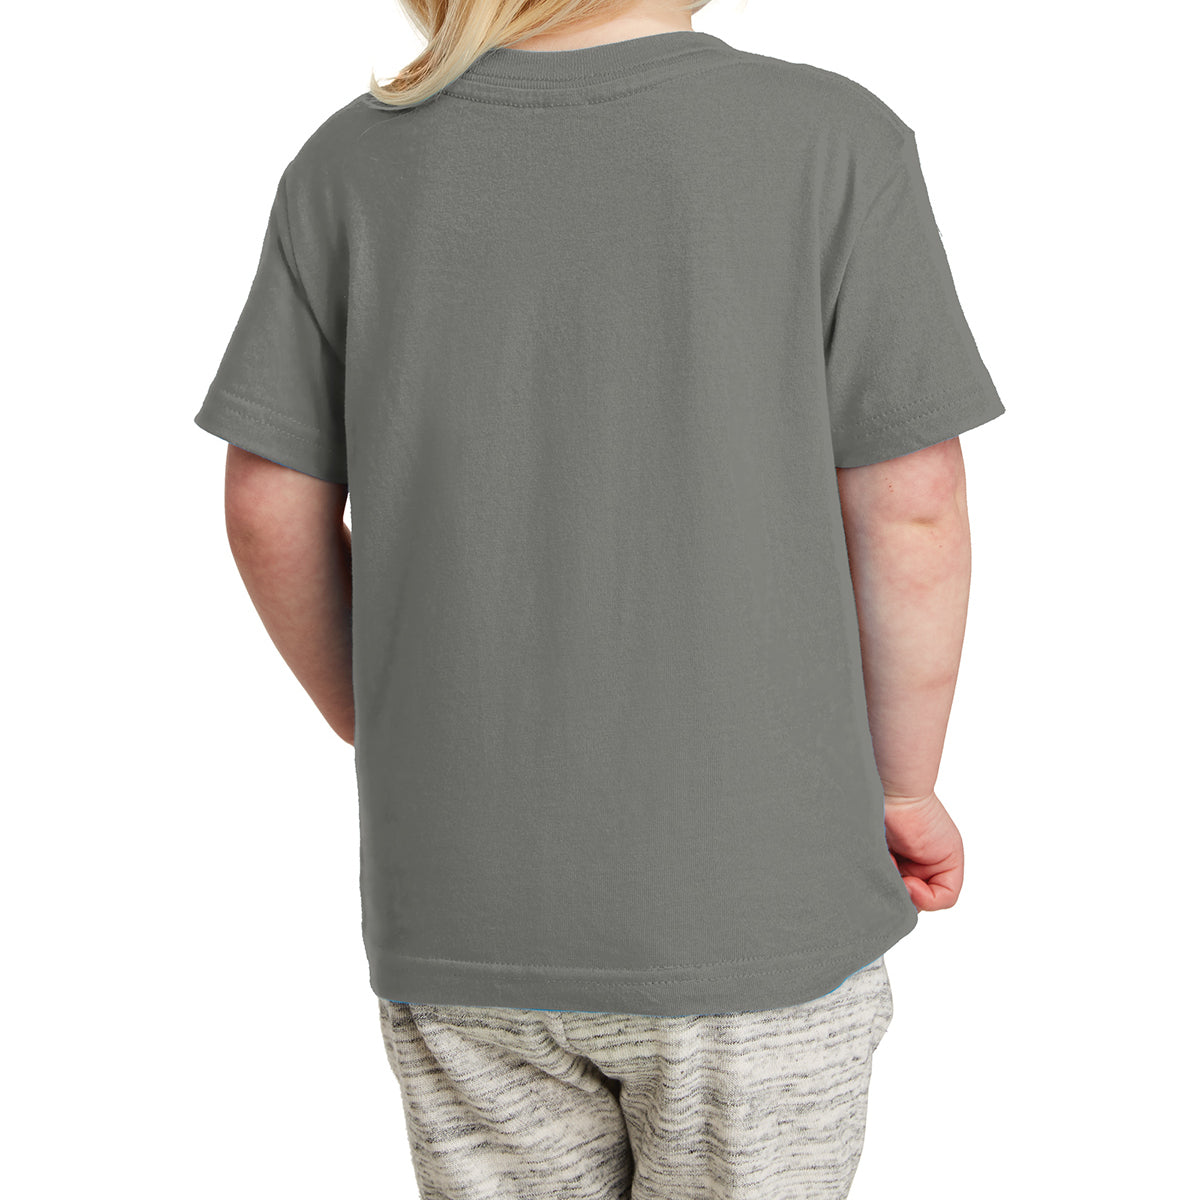 Toddler Fine Jersey Tee - Charcoal